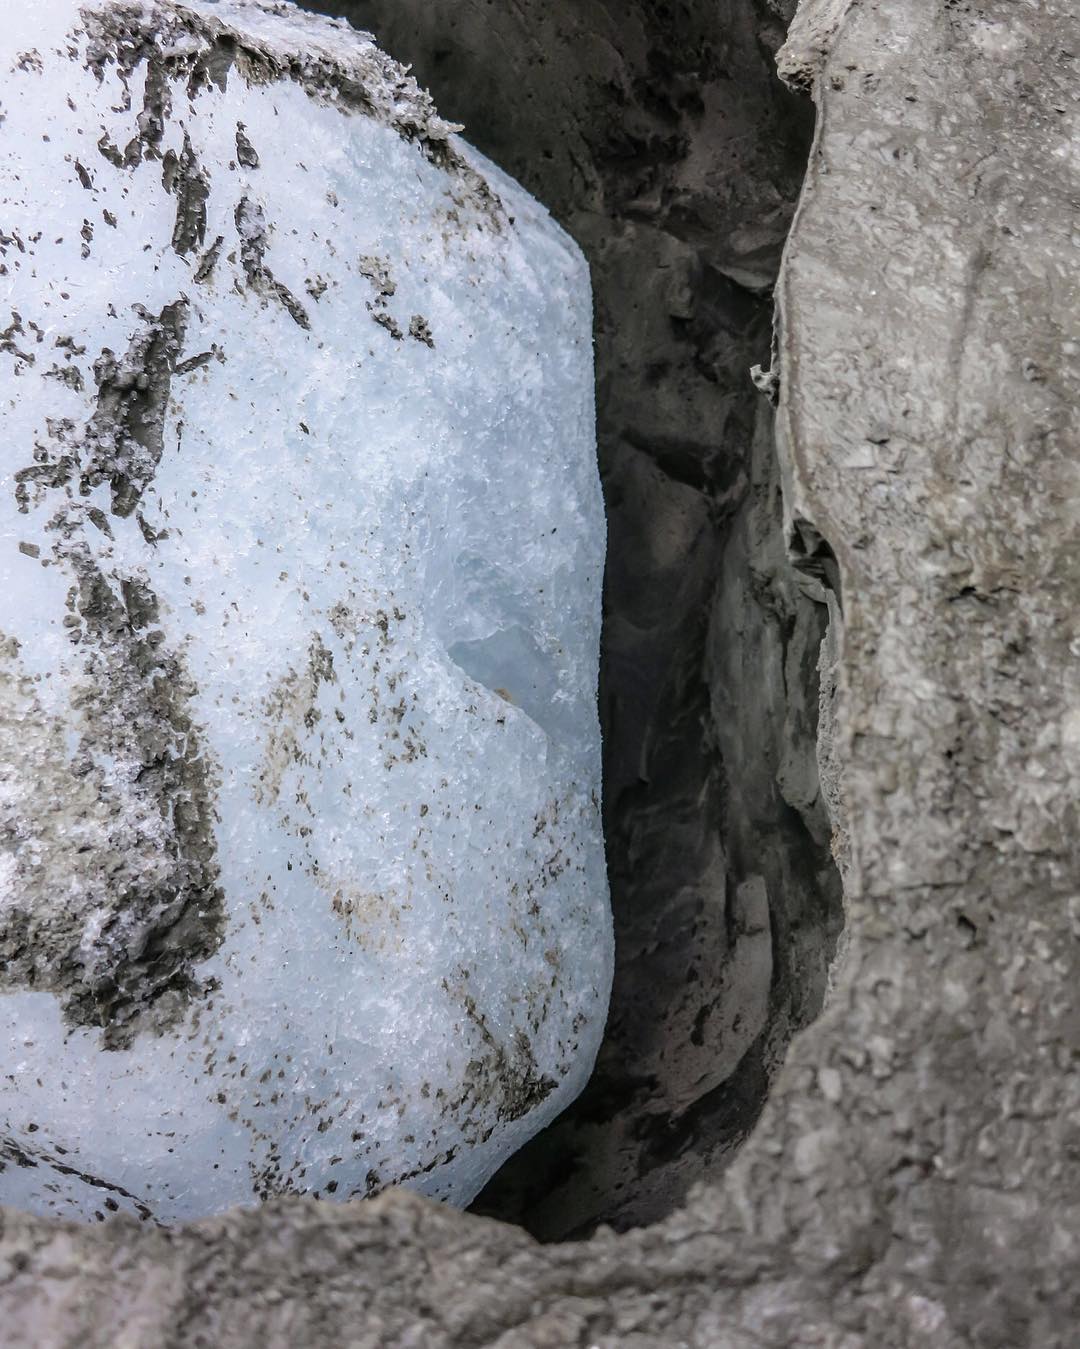 A piece of Greenland ice being cast in concrete. Image courtesy of Studio Olafur Eliasson's Instagram